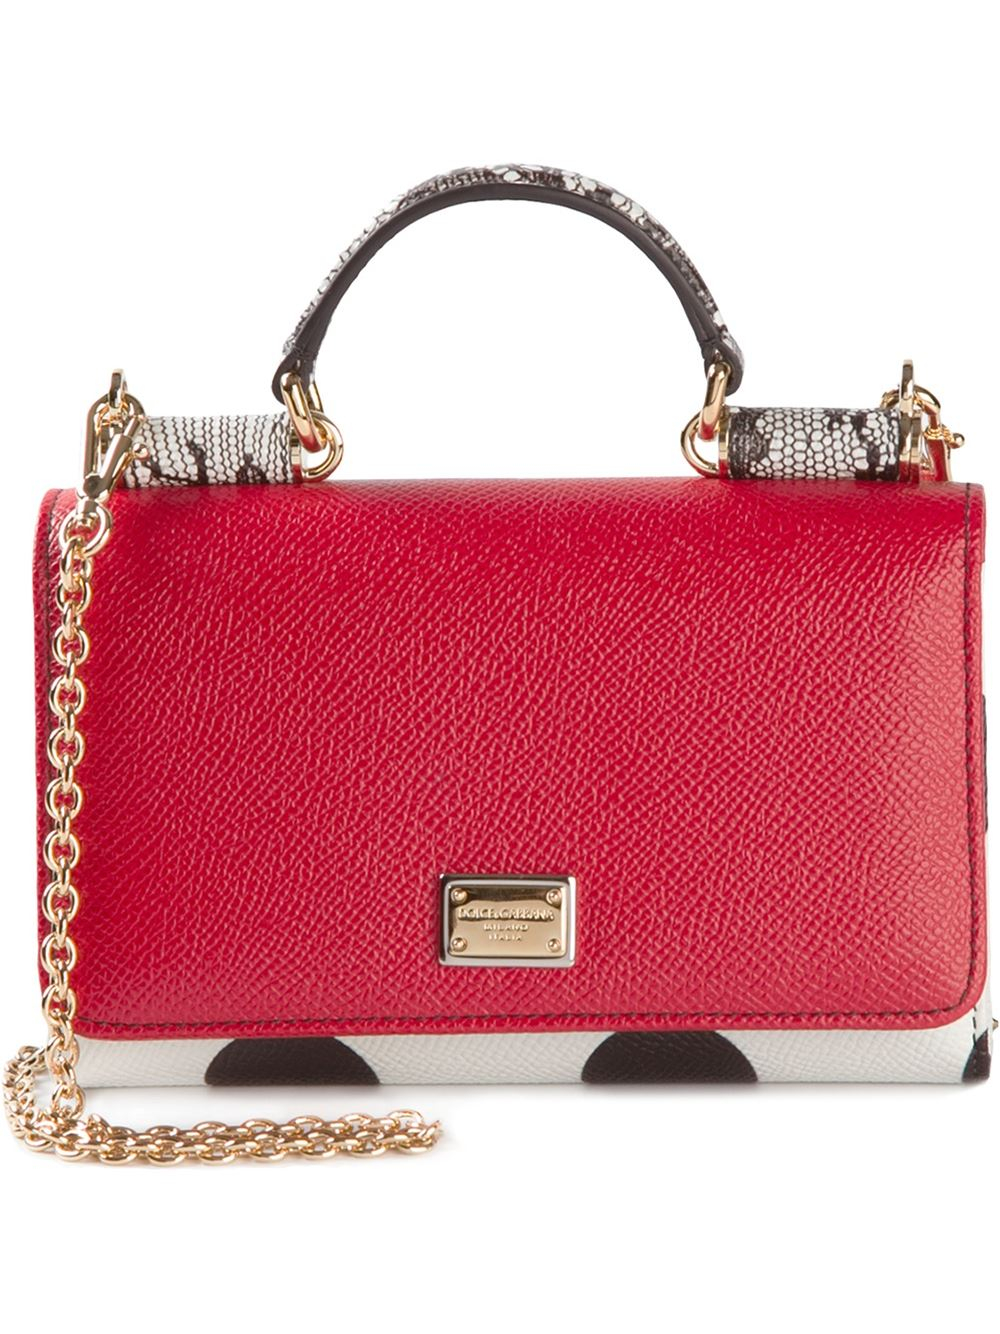 Lyst - Dolce & Gabbana Small 'Miss Sicily' Shoulder Bag in Red